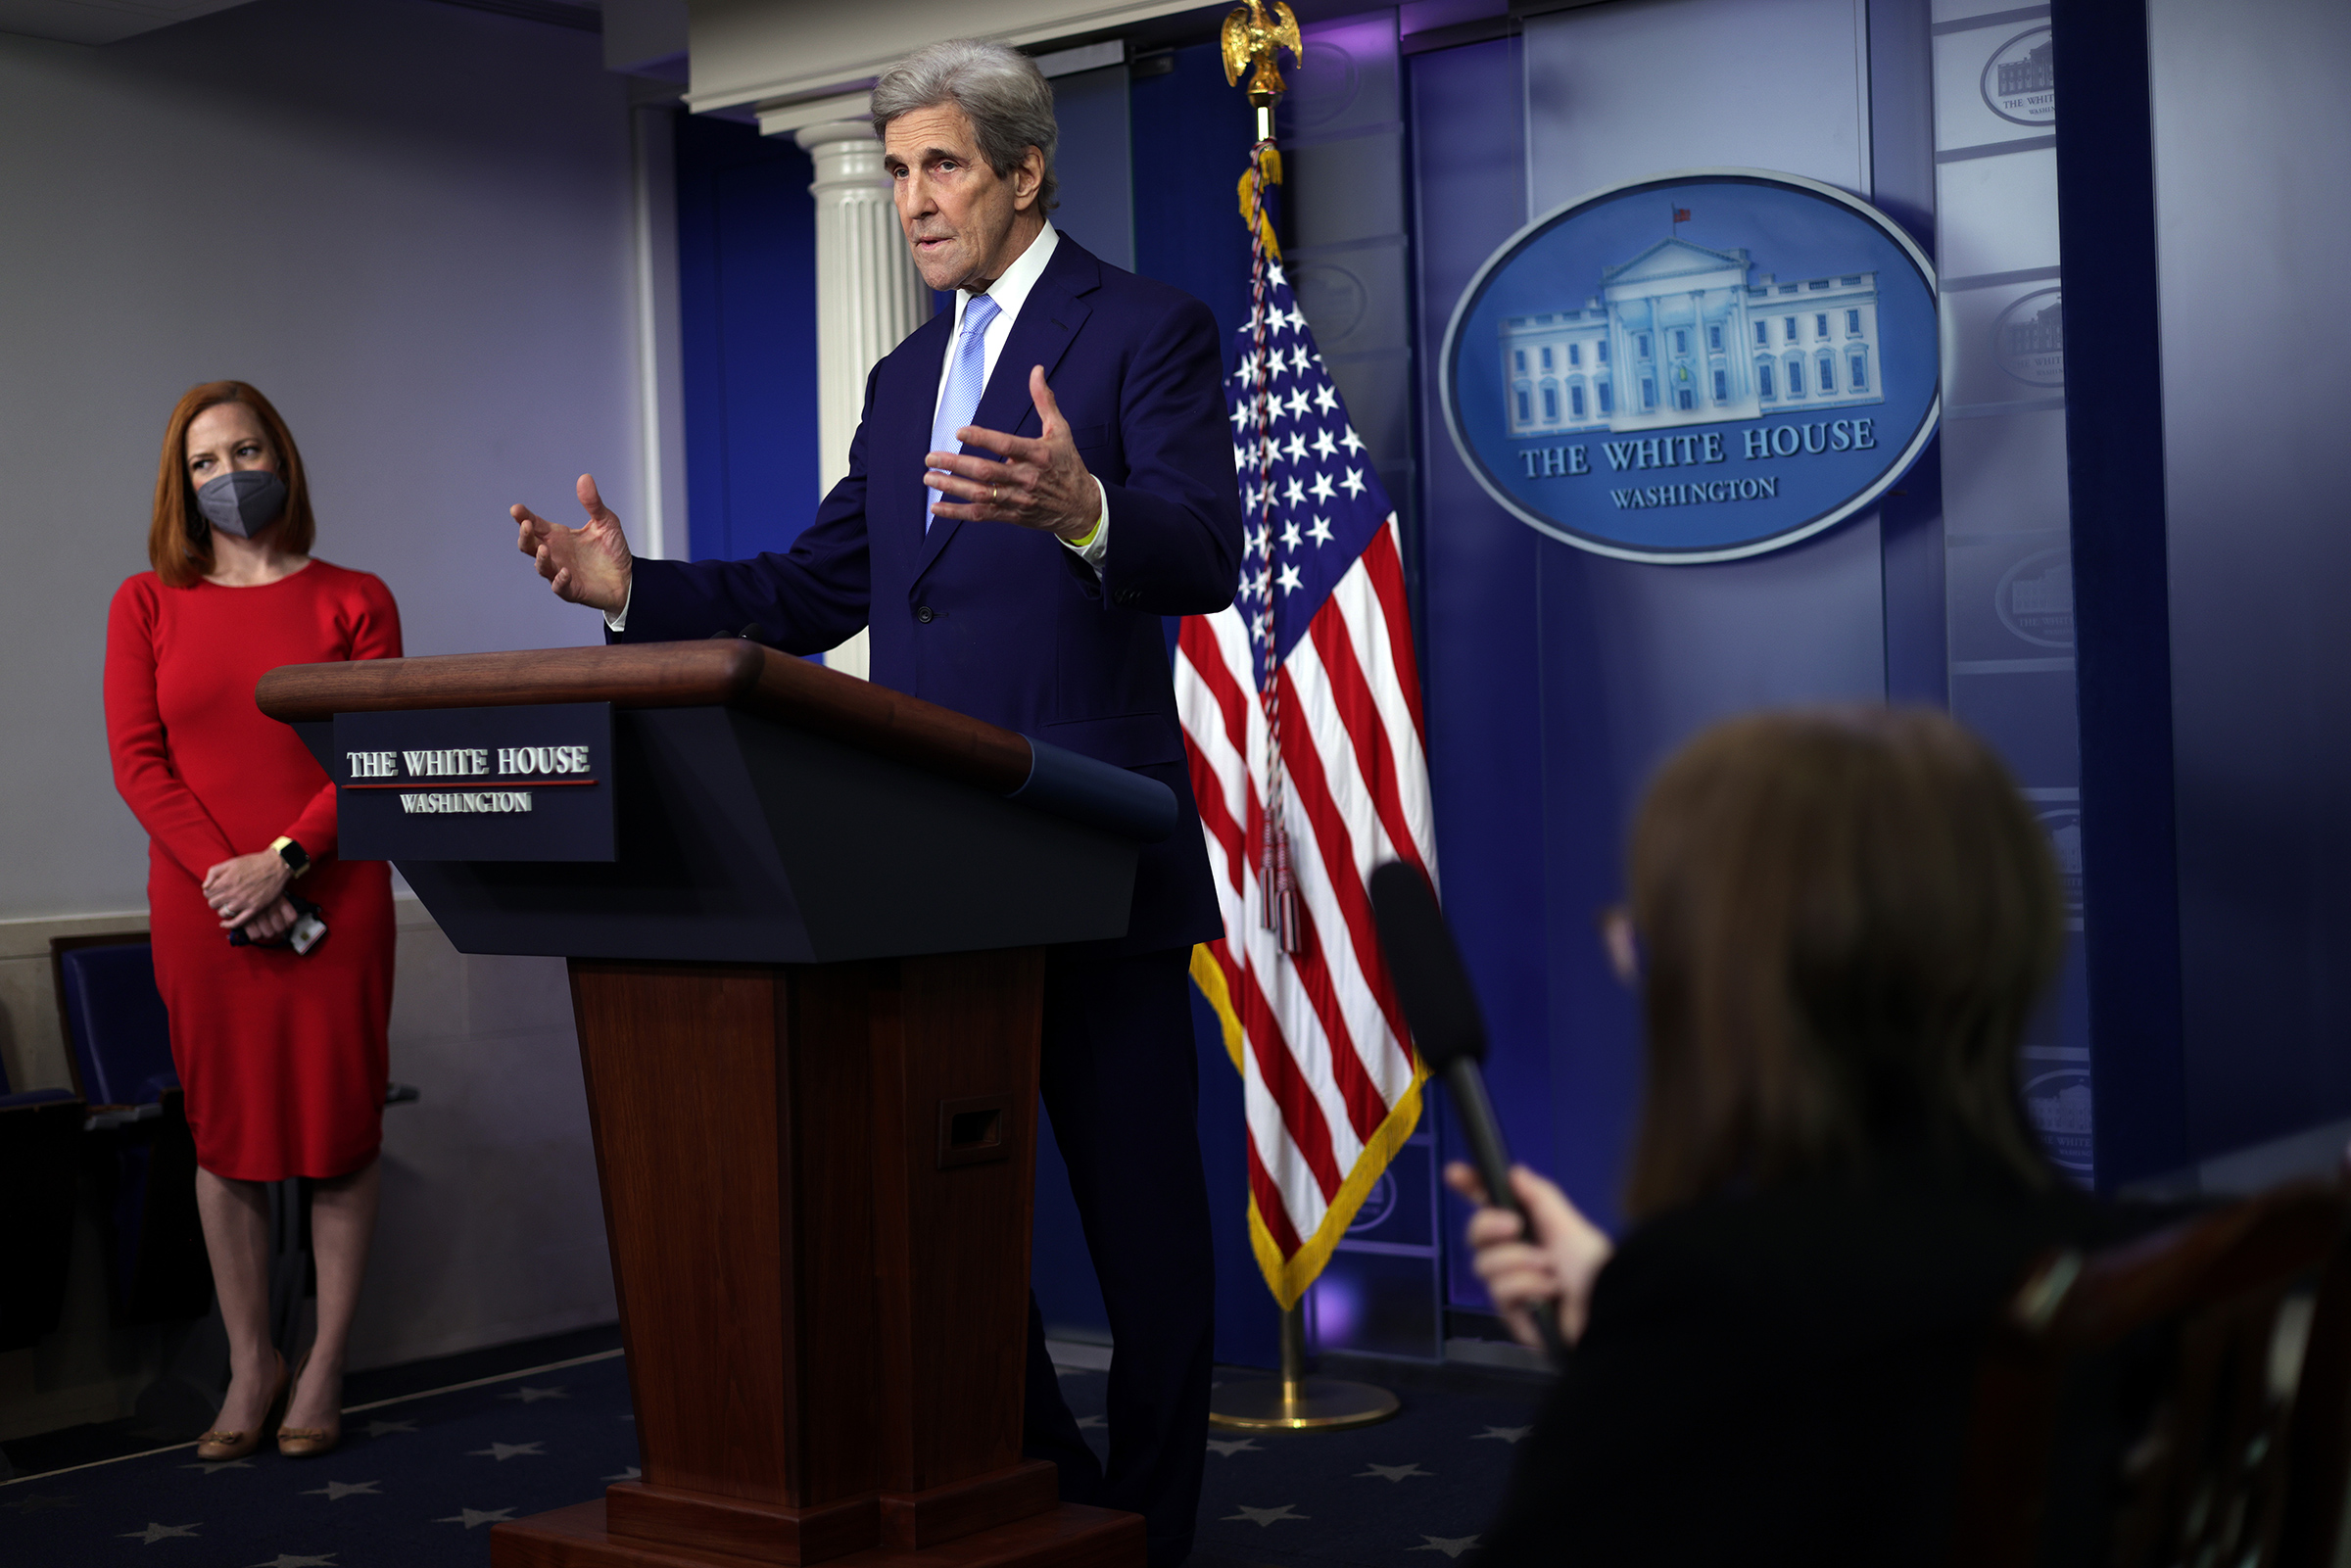 Kerry addressing the White House press corps (Alex Wong—Getty Images)